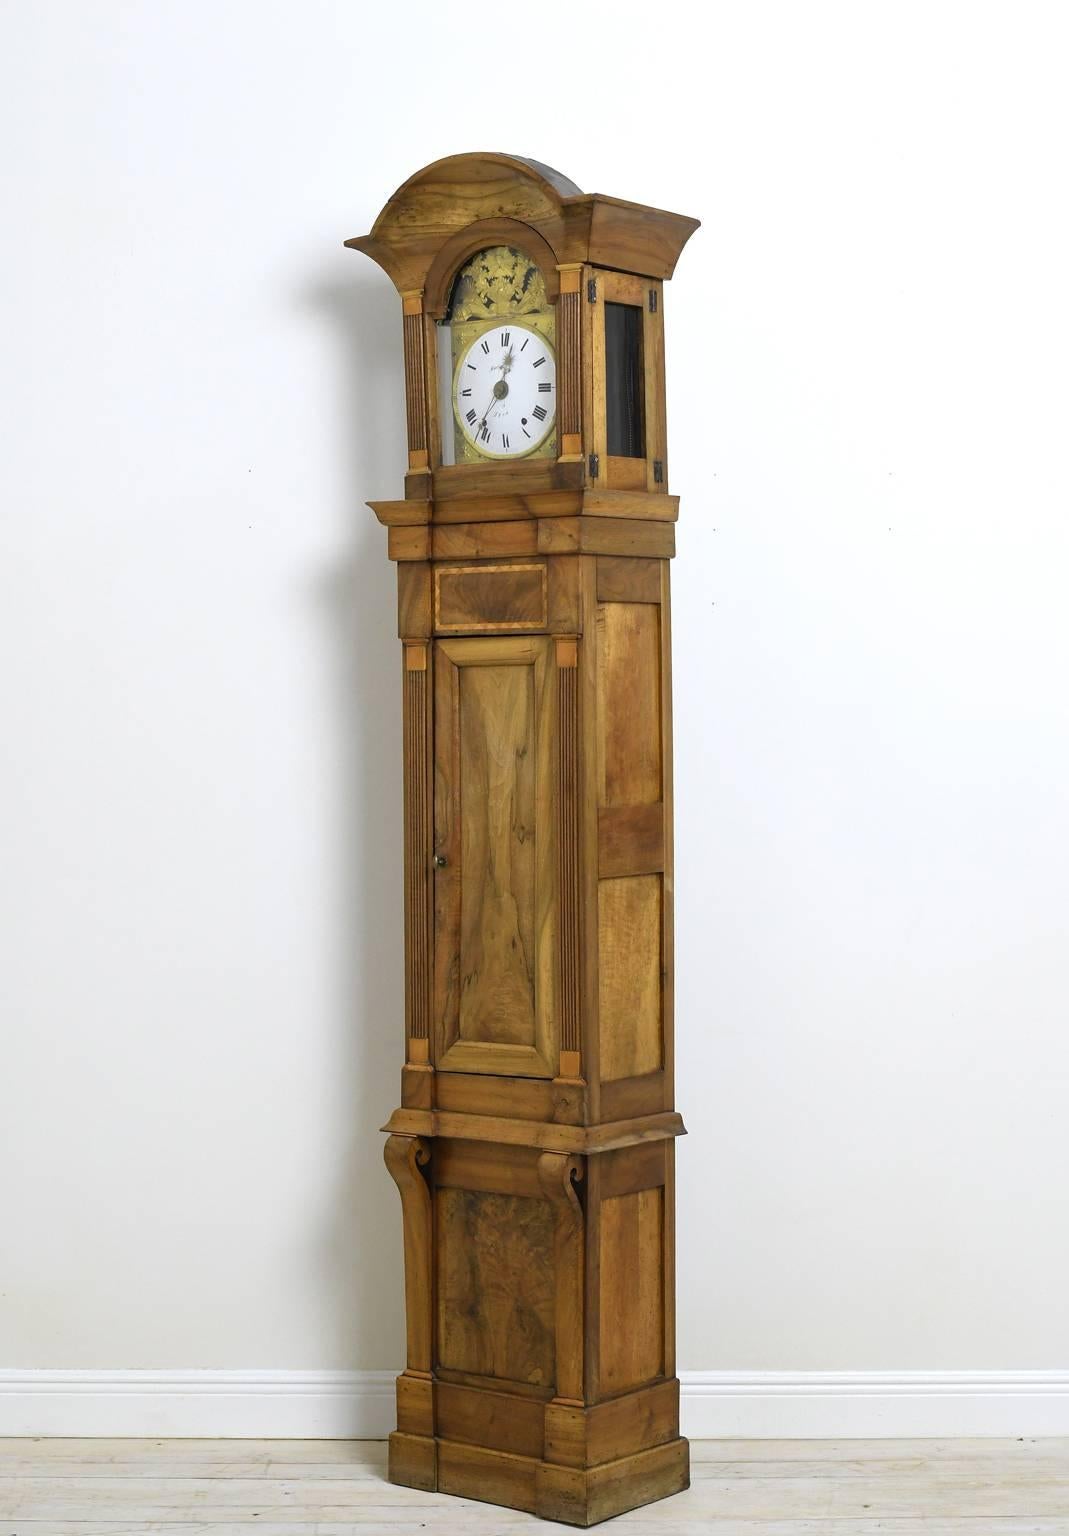 From the historically important city of Lyon, an impressive & well-proportioned late 18th century Louis XVI long-case clock in walnut with inlays. This Comtoise clock assembled in the Compté region of France was brought to Lyon by the 